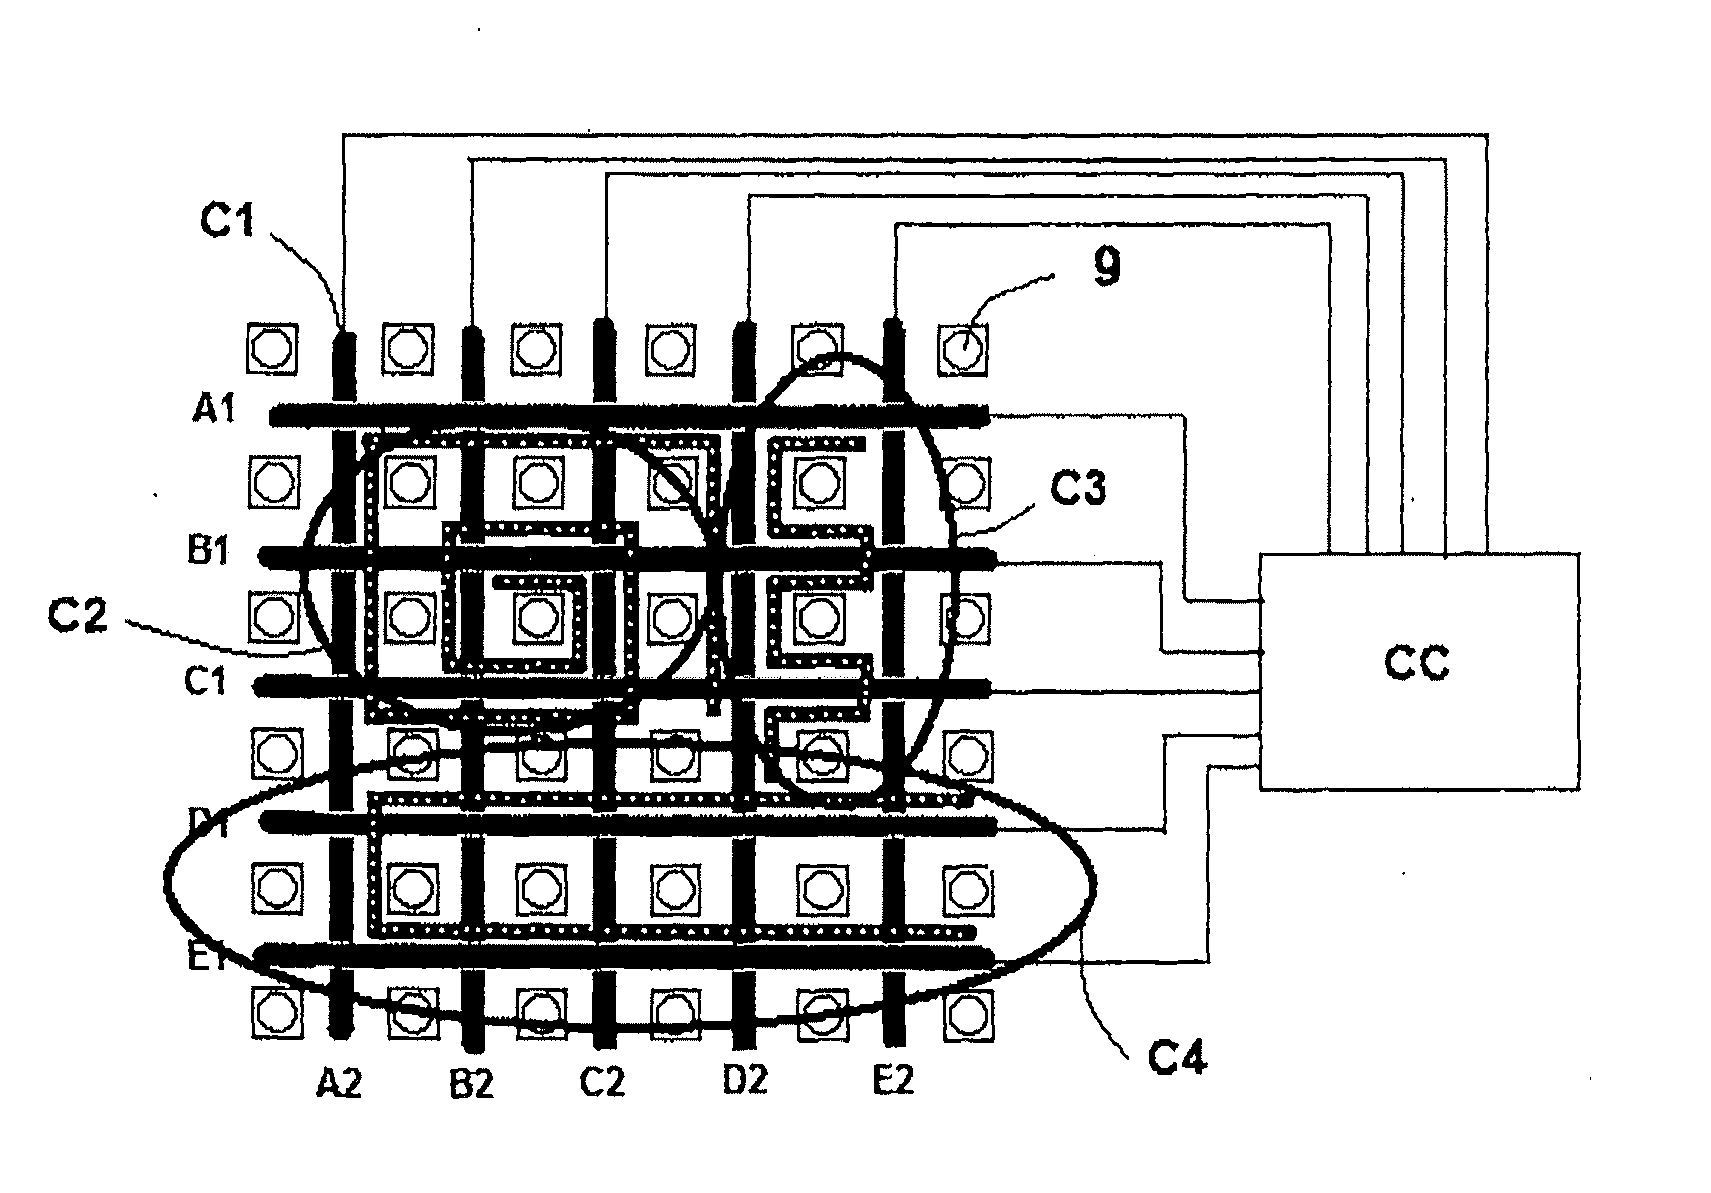 Display device including a multifunctional and communicating surface